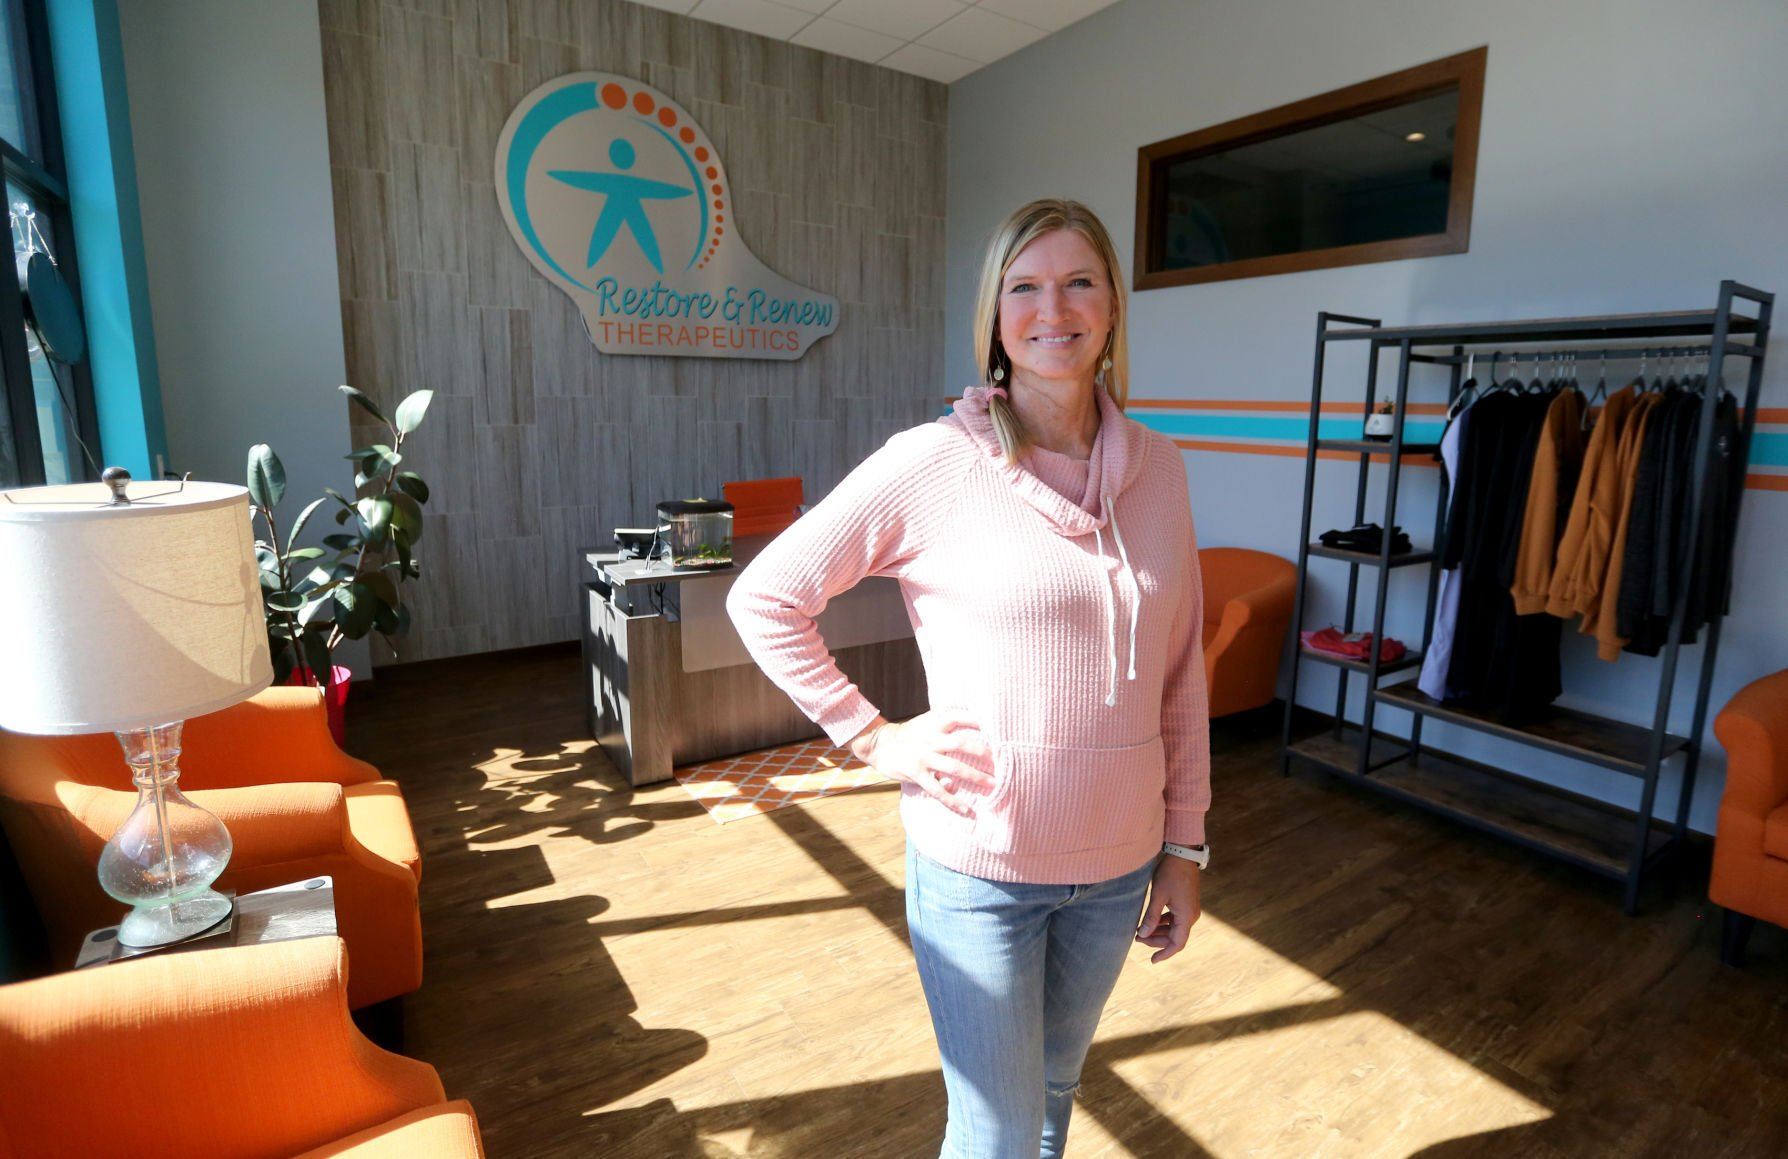 Lindsey Topping owns Restore and Renew Therapeutics in Asbury, Iowa.    PHOTO CREDIT: JESSICA REILLY